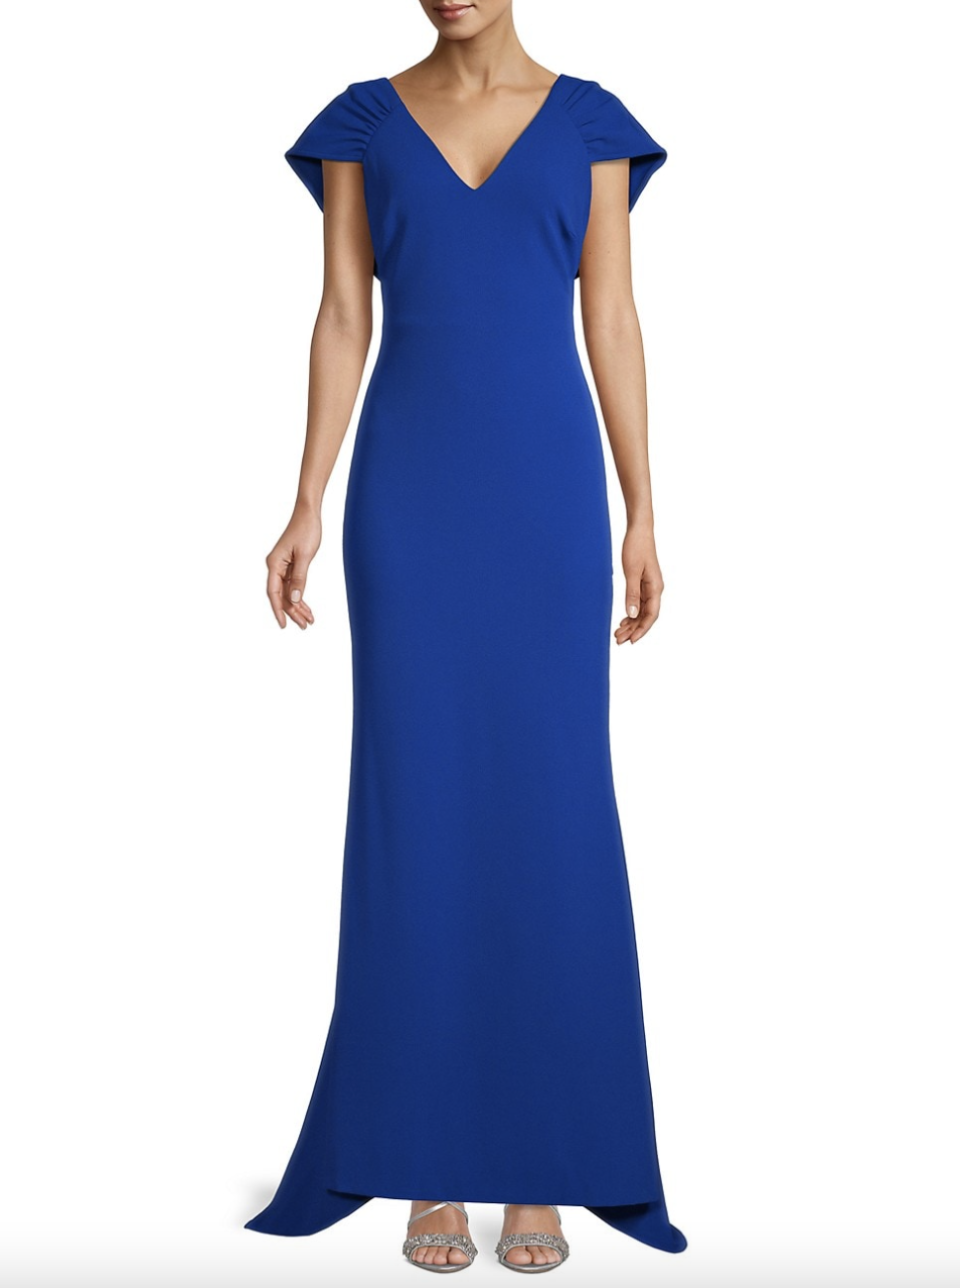 white model in cobalt blue Calvin Klein Pleated Gown (Photo via Saks Off Fifth)